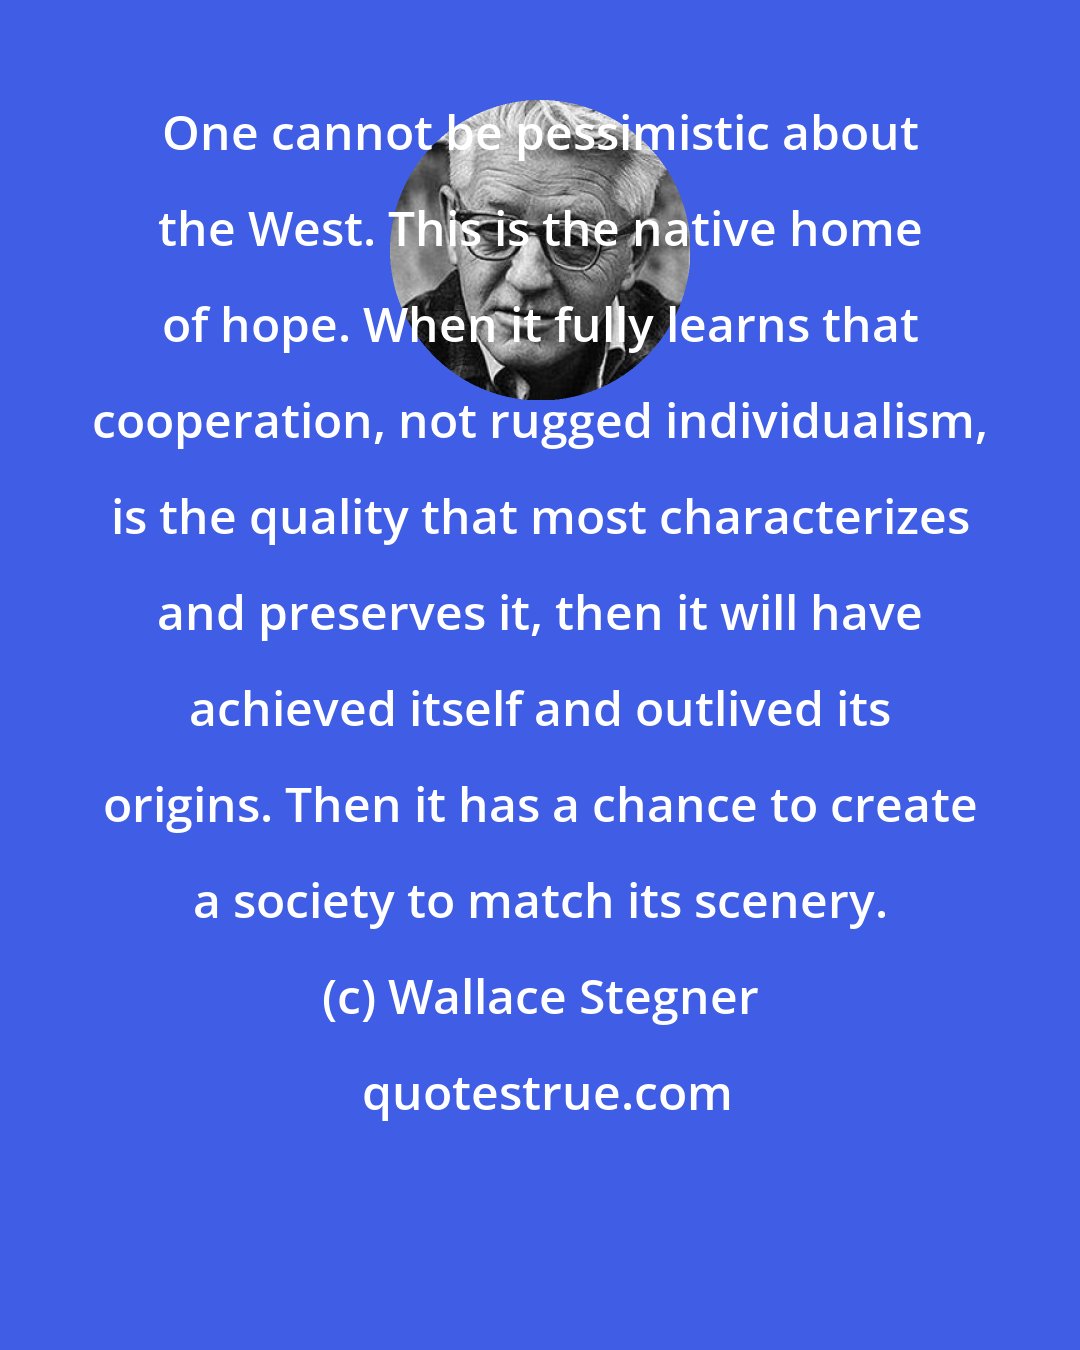 Wallace Stegner: One cannot be pessimistic about the West. This is the native home of hope. When it fully learns that cooperation, not rugged individualism, is the quality that most characterizes and preserves it, then it will have achieved itself and outlived its origins. Then it has a chance to create a society to match its scenery.